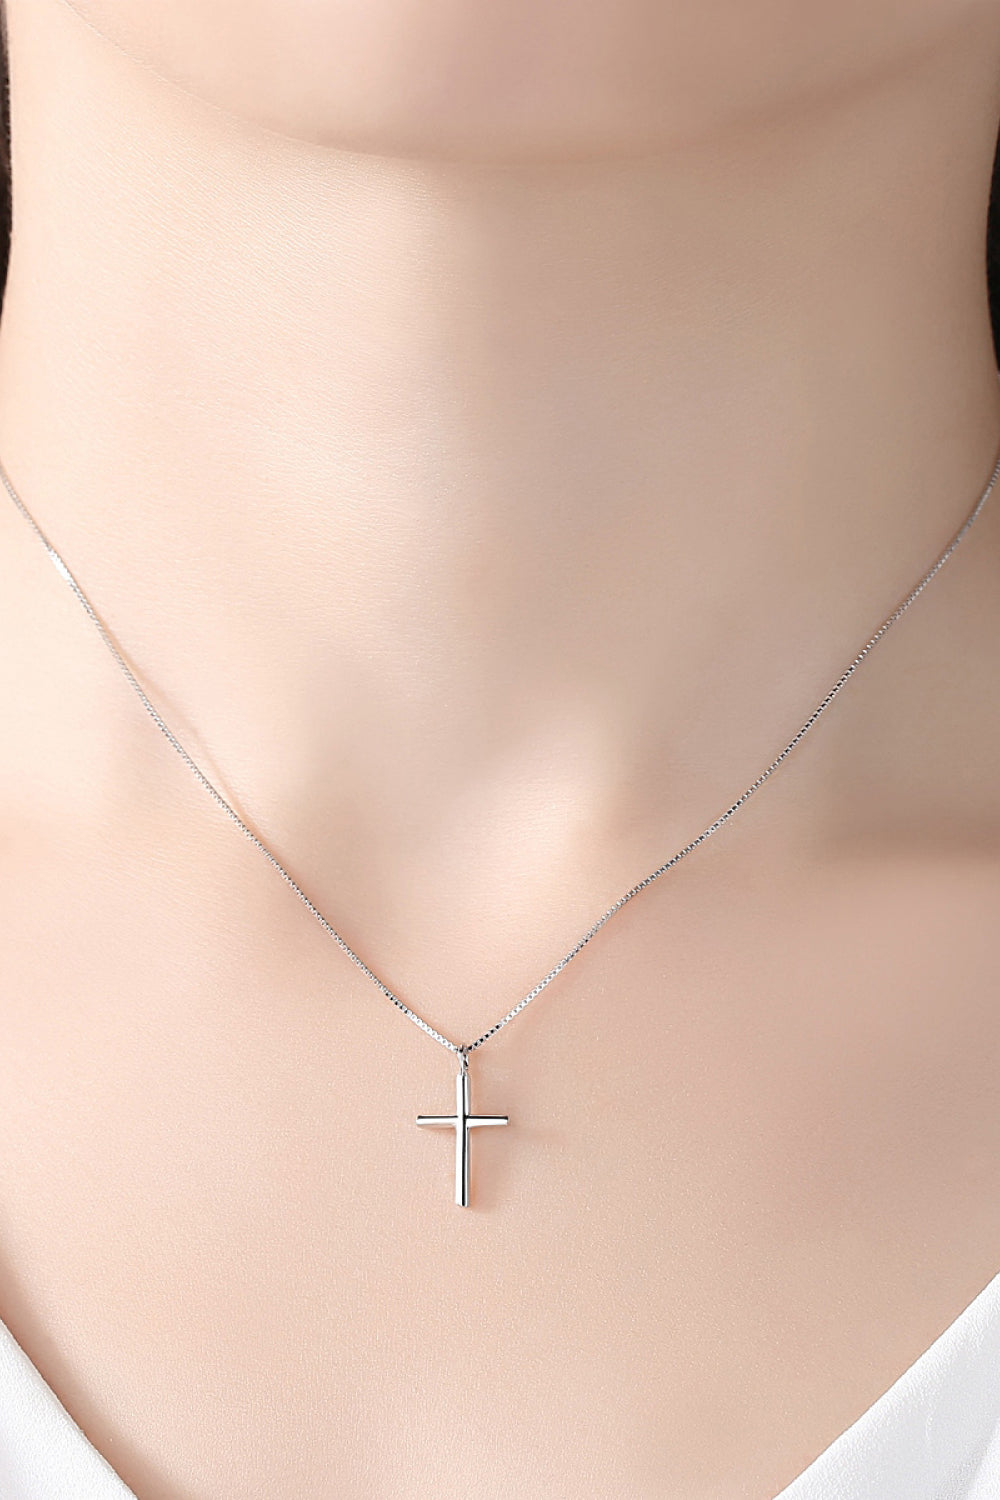 Cross Pendant 925 Sterling Silver Necklace - Necklace - Wild Willows Boutique - Massapequa, NY, affordable and fashionable clothing for women of all ages. Bottoms, tops, dresses, intimates, outerwear, sweater, shoes, accessories, jewelry, active wear, and more // Wild Willow Boutique.